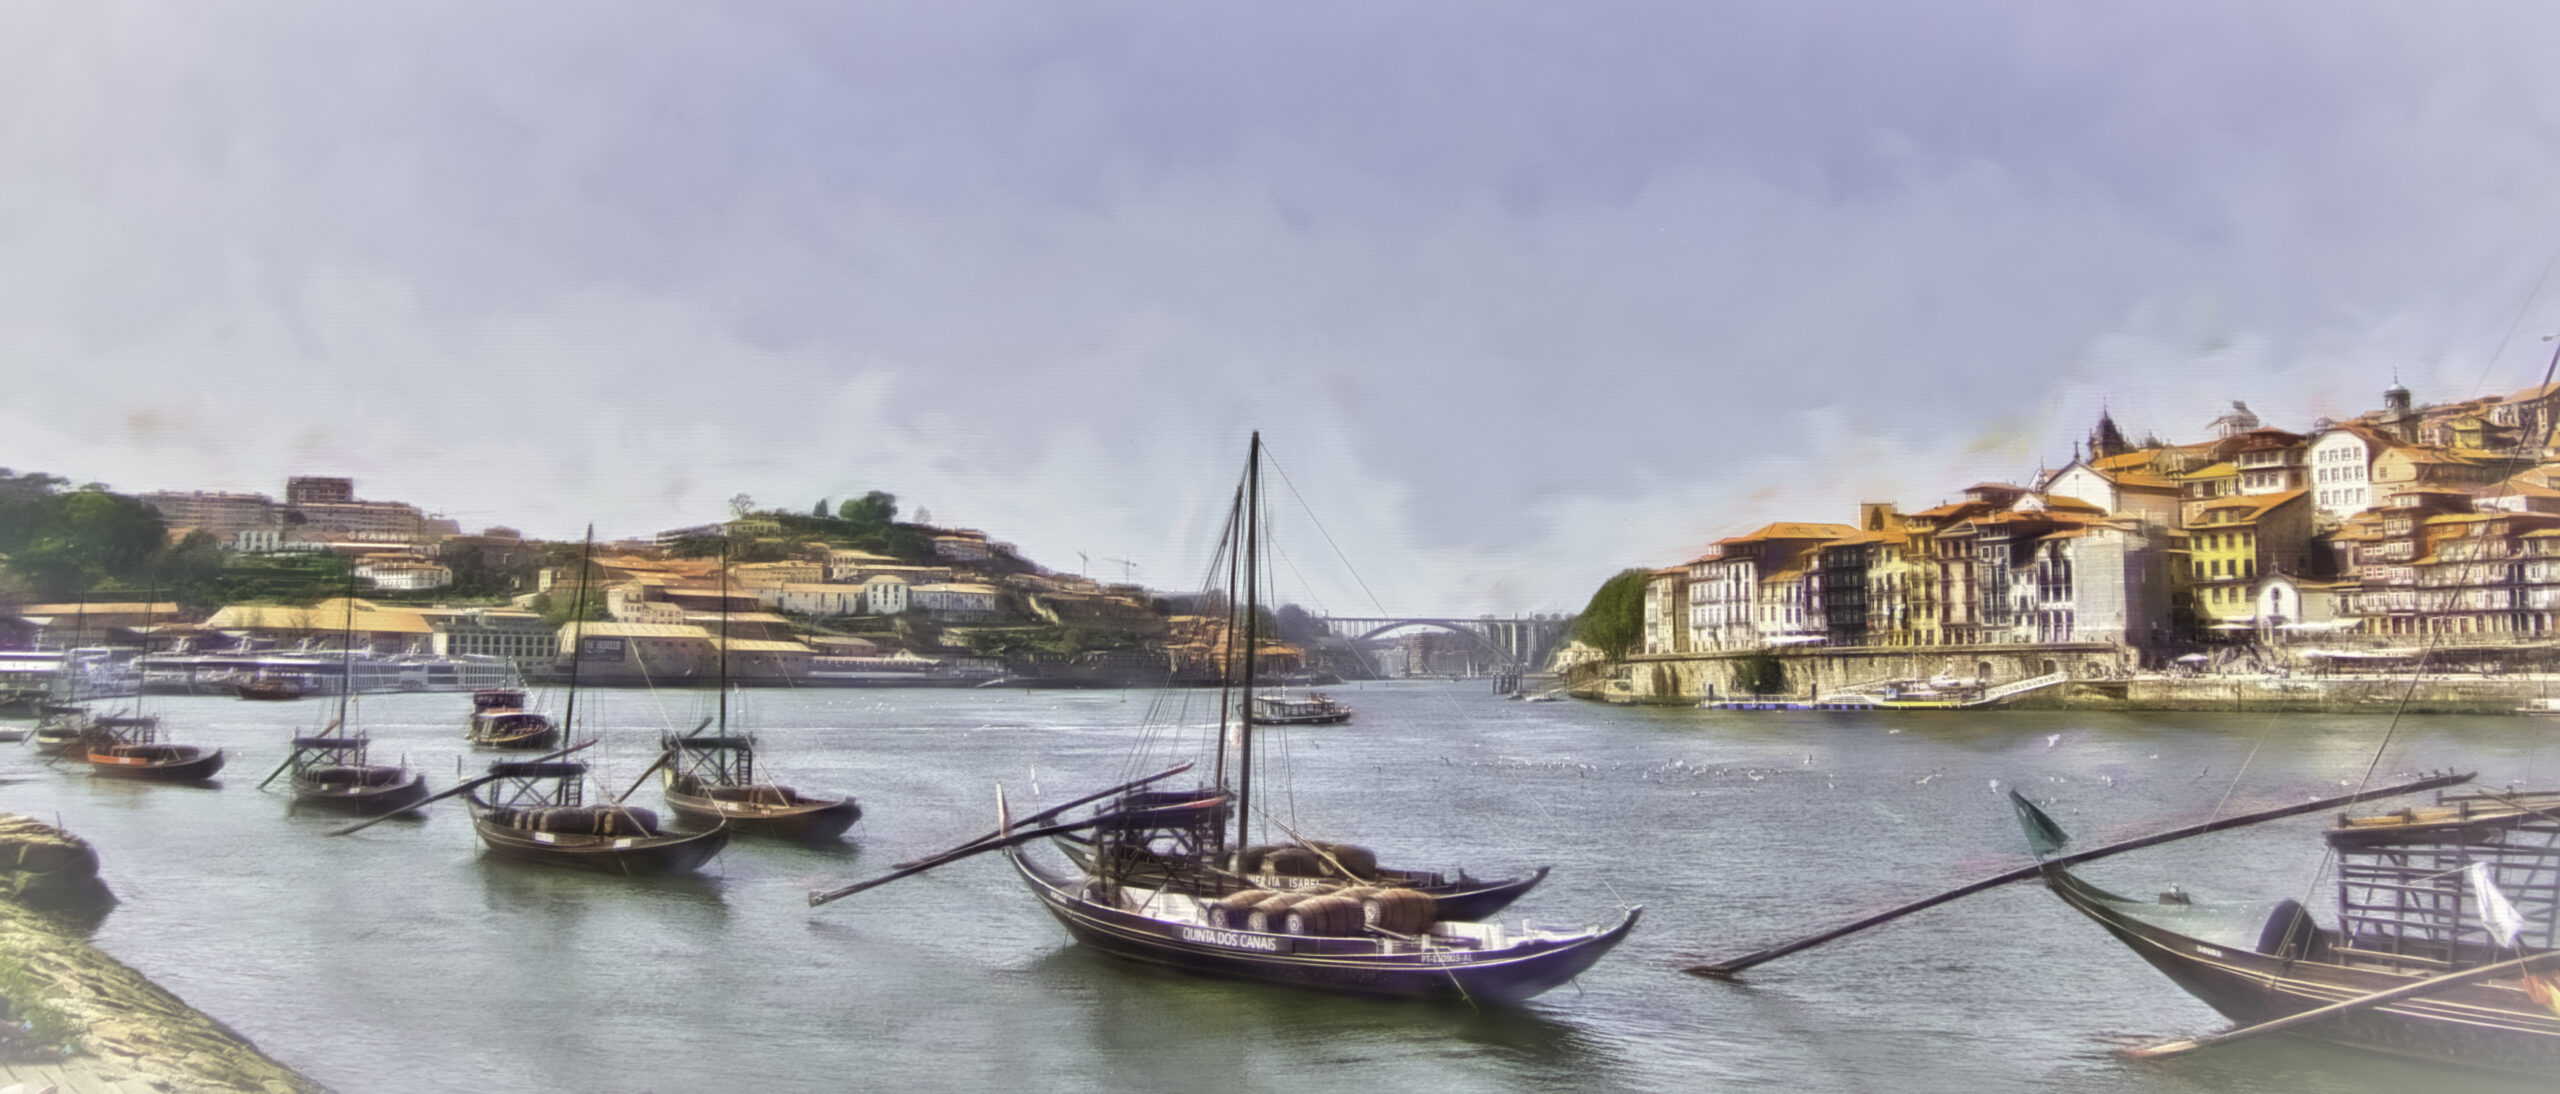 Boats in the Douro River looking towards Porto, Portugal